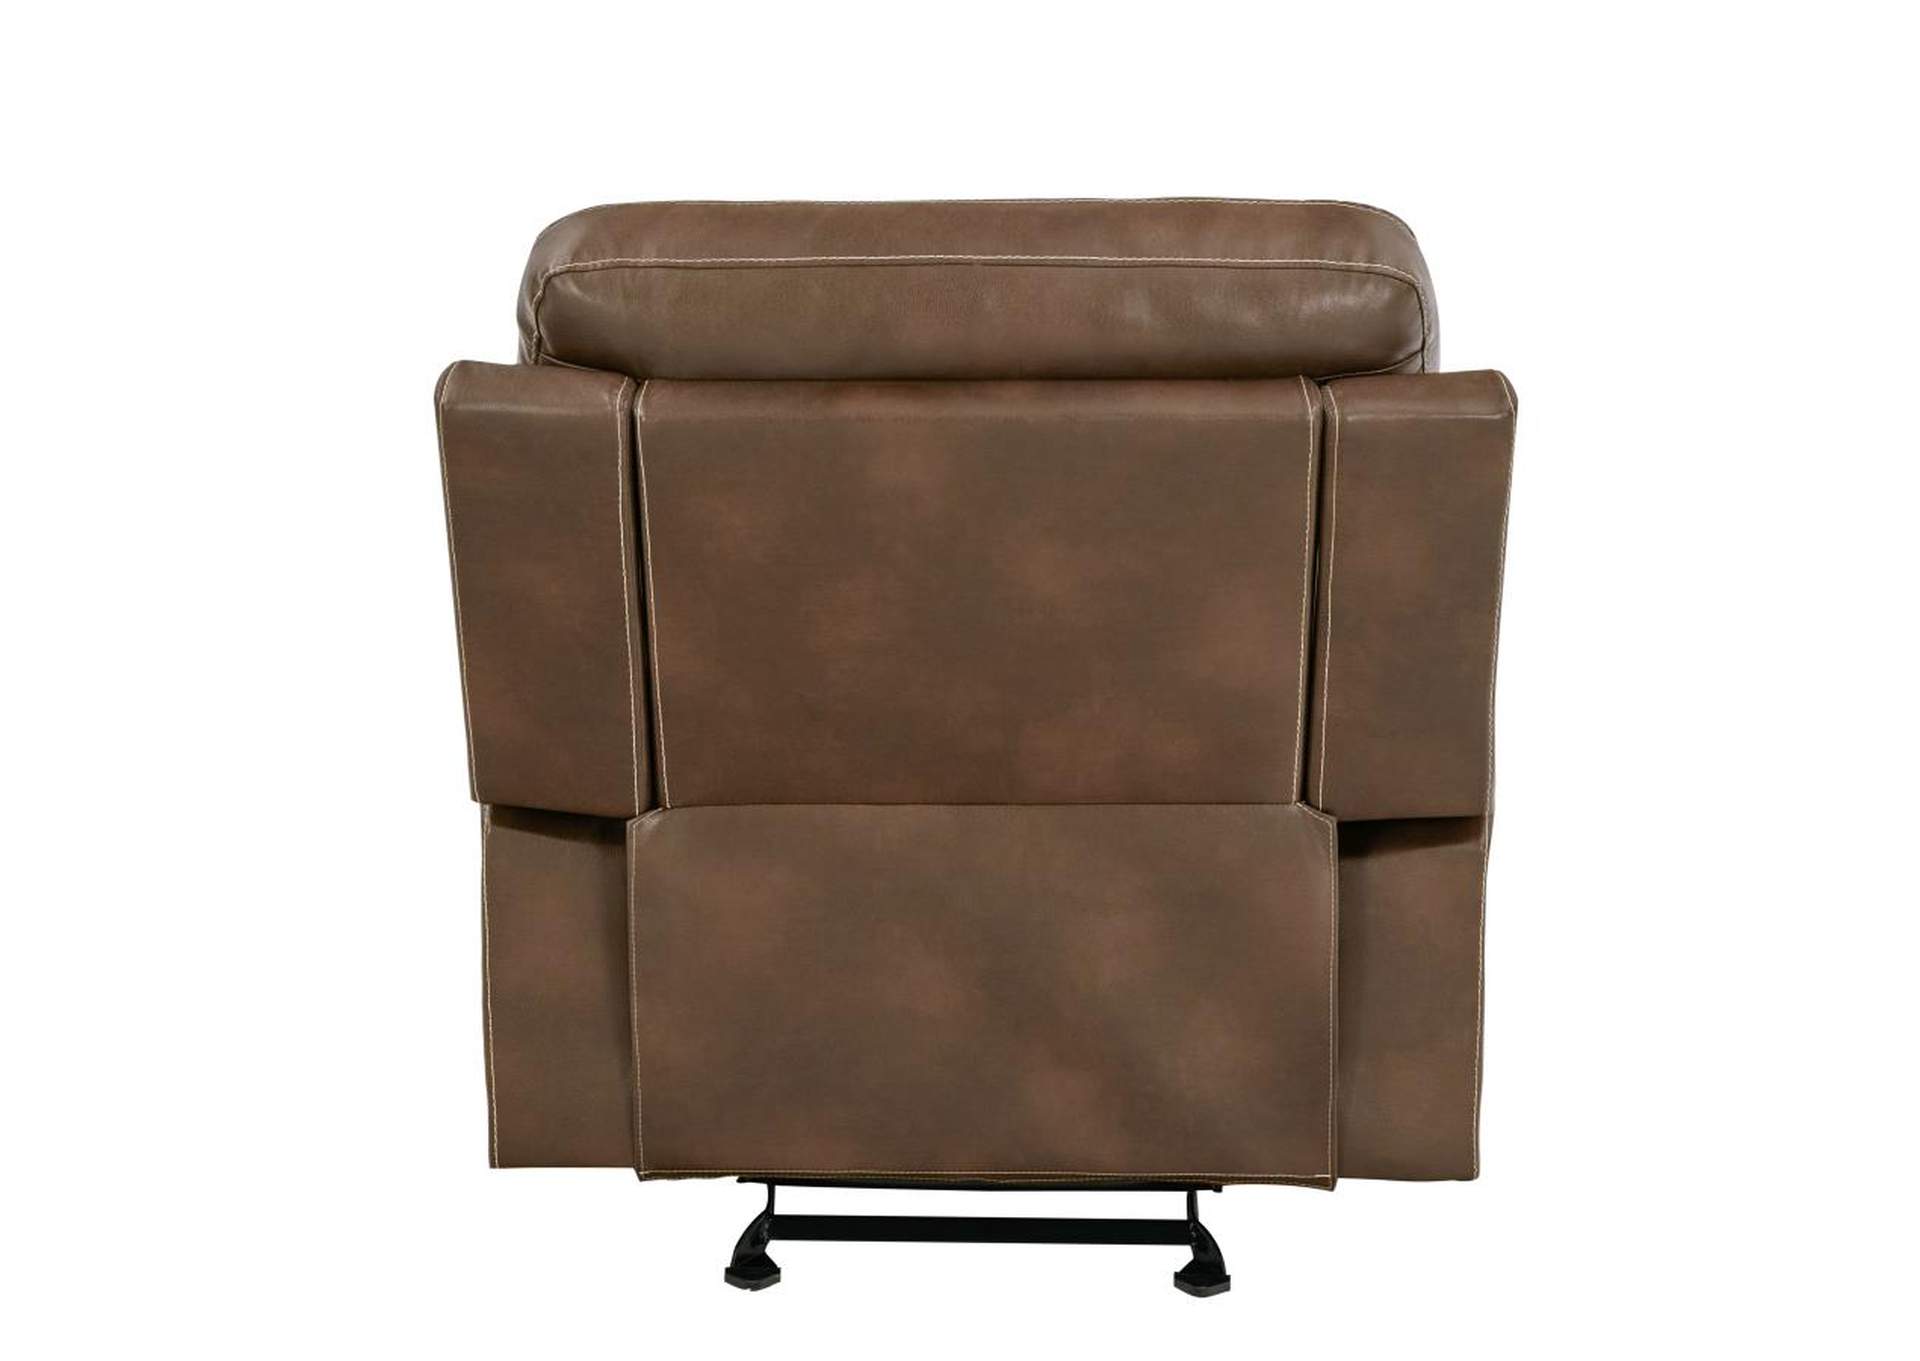 Damiano Upholstered Glider Recliner Tri-tone Brown,Coaster Furniture